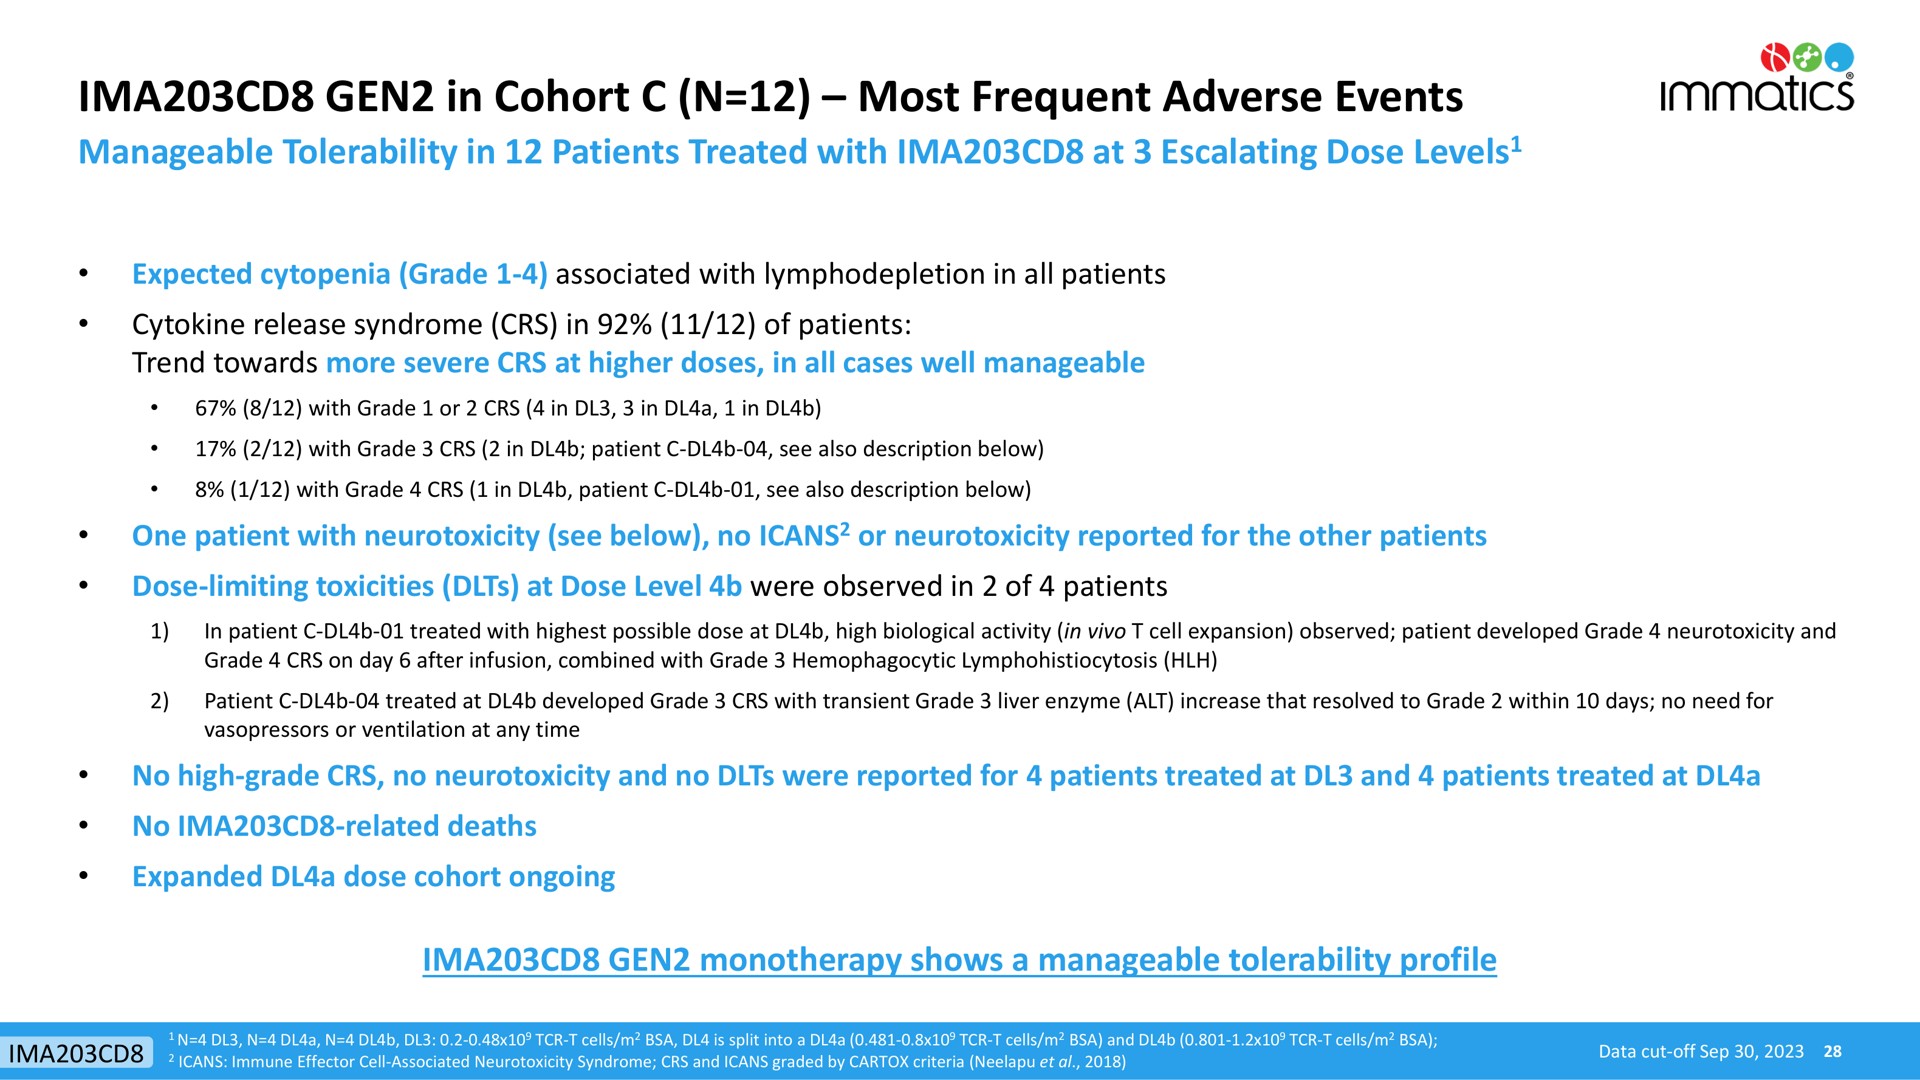 gen in cohort most frequent adverse events | Immatics